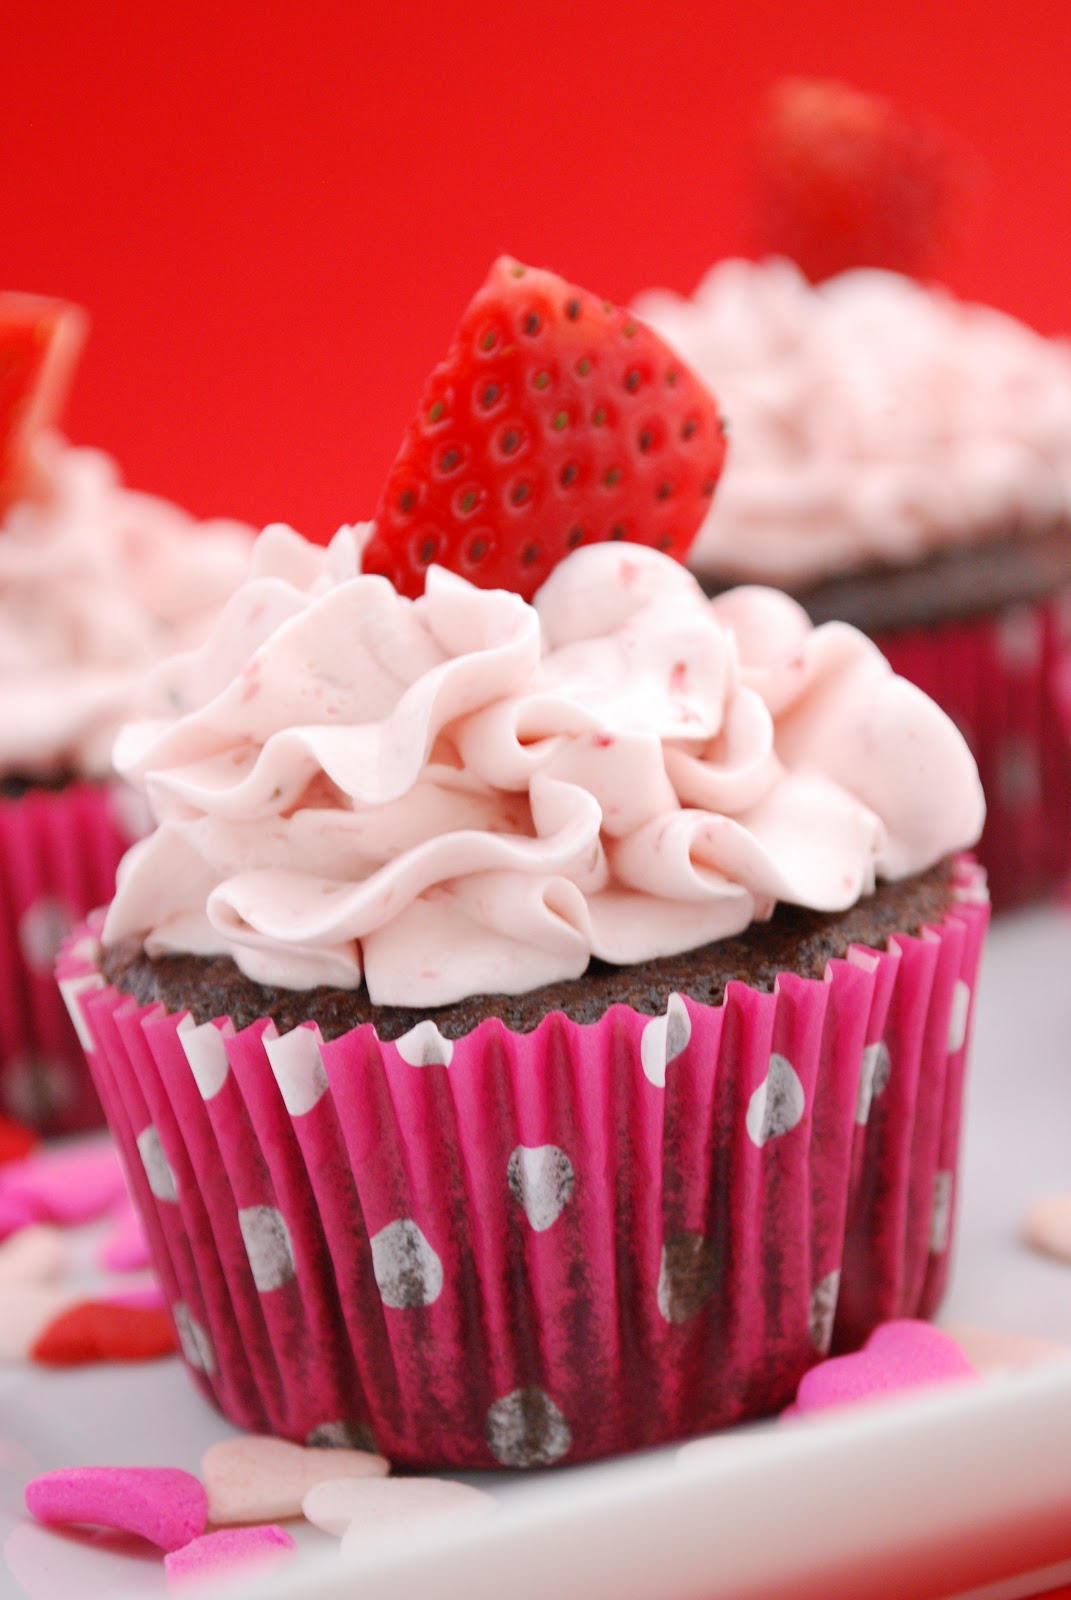 Chocolate and Strawberry Cupcakes | Quick & Easy Recipes